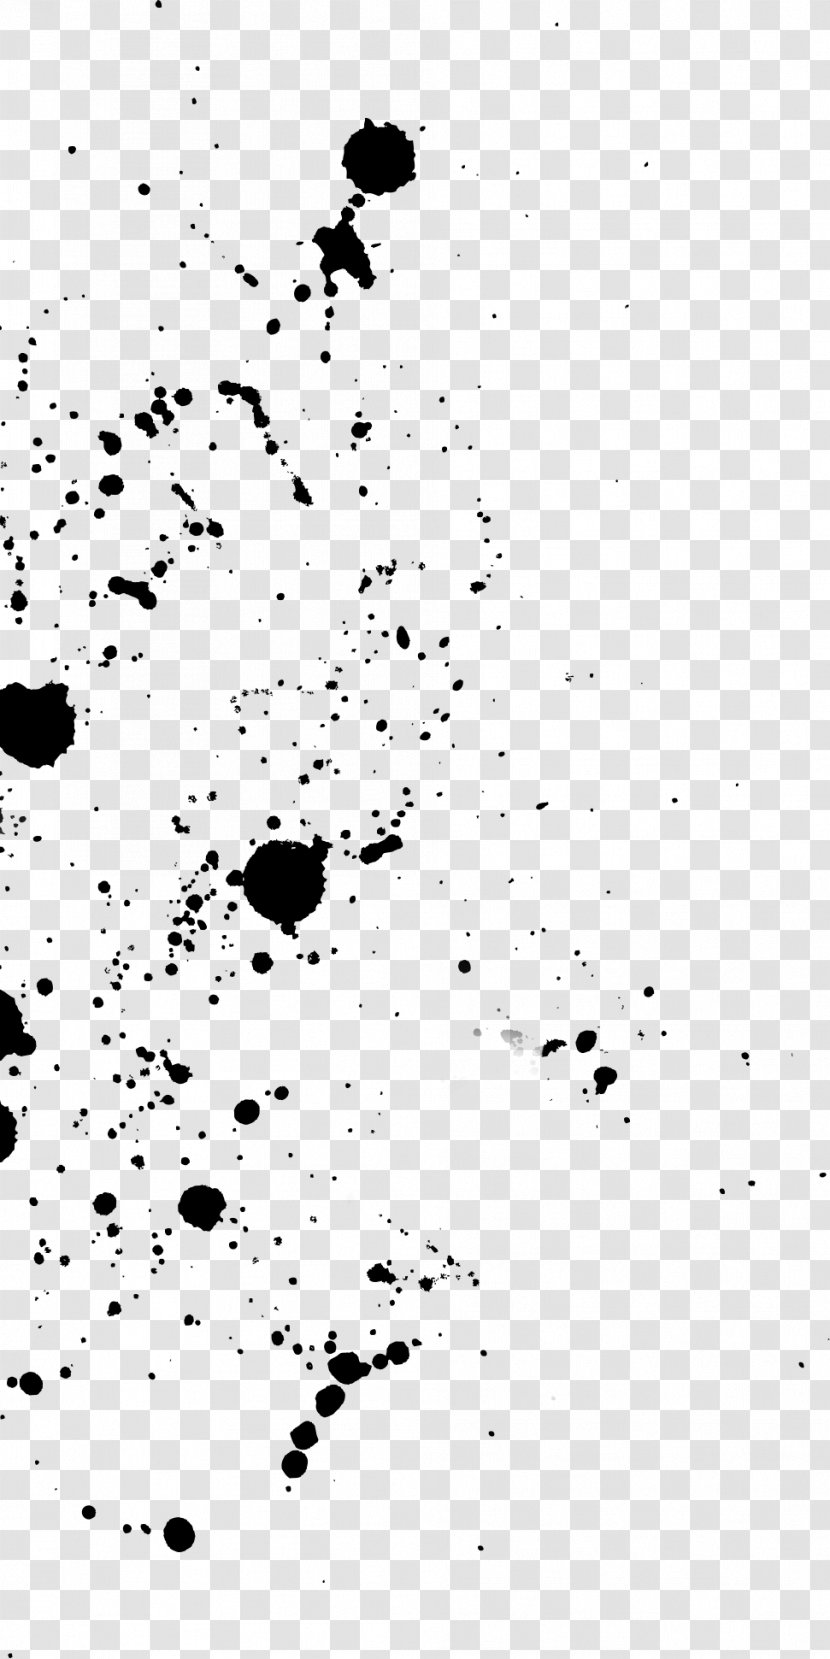 Black And White Monochrome Photography - Ink Splash Transparent PNG